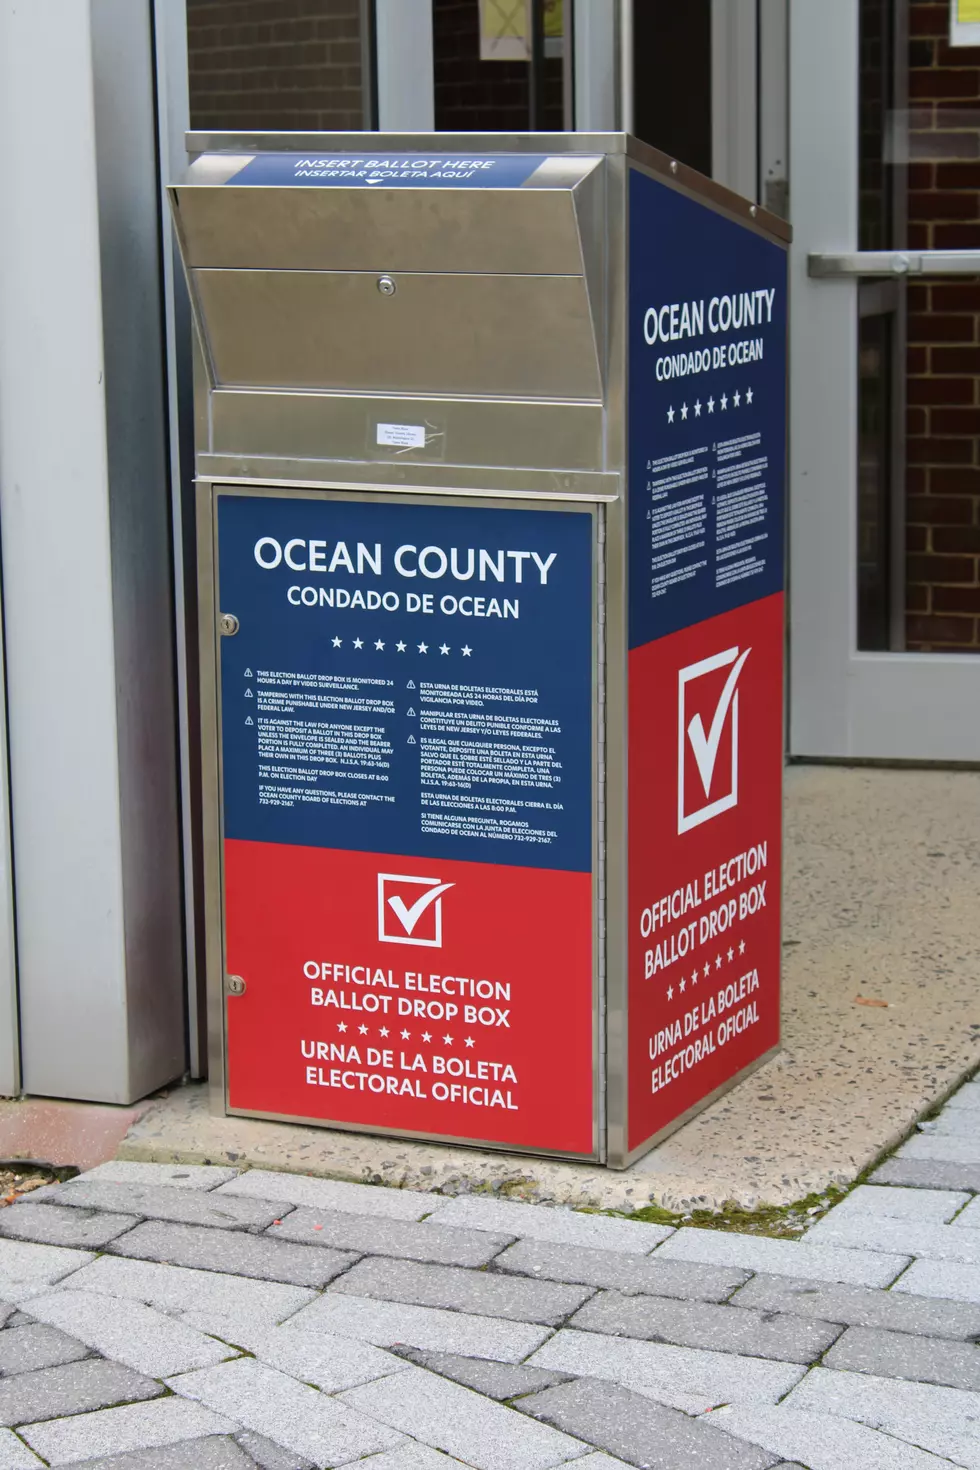 Here are the drop off and early voting locations for you in Ocean County, NJ